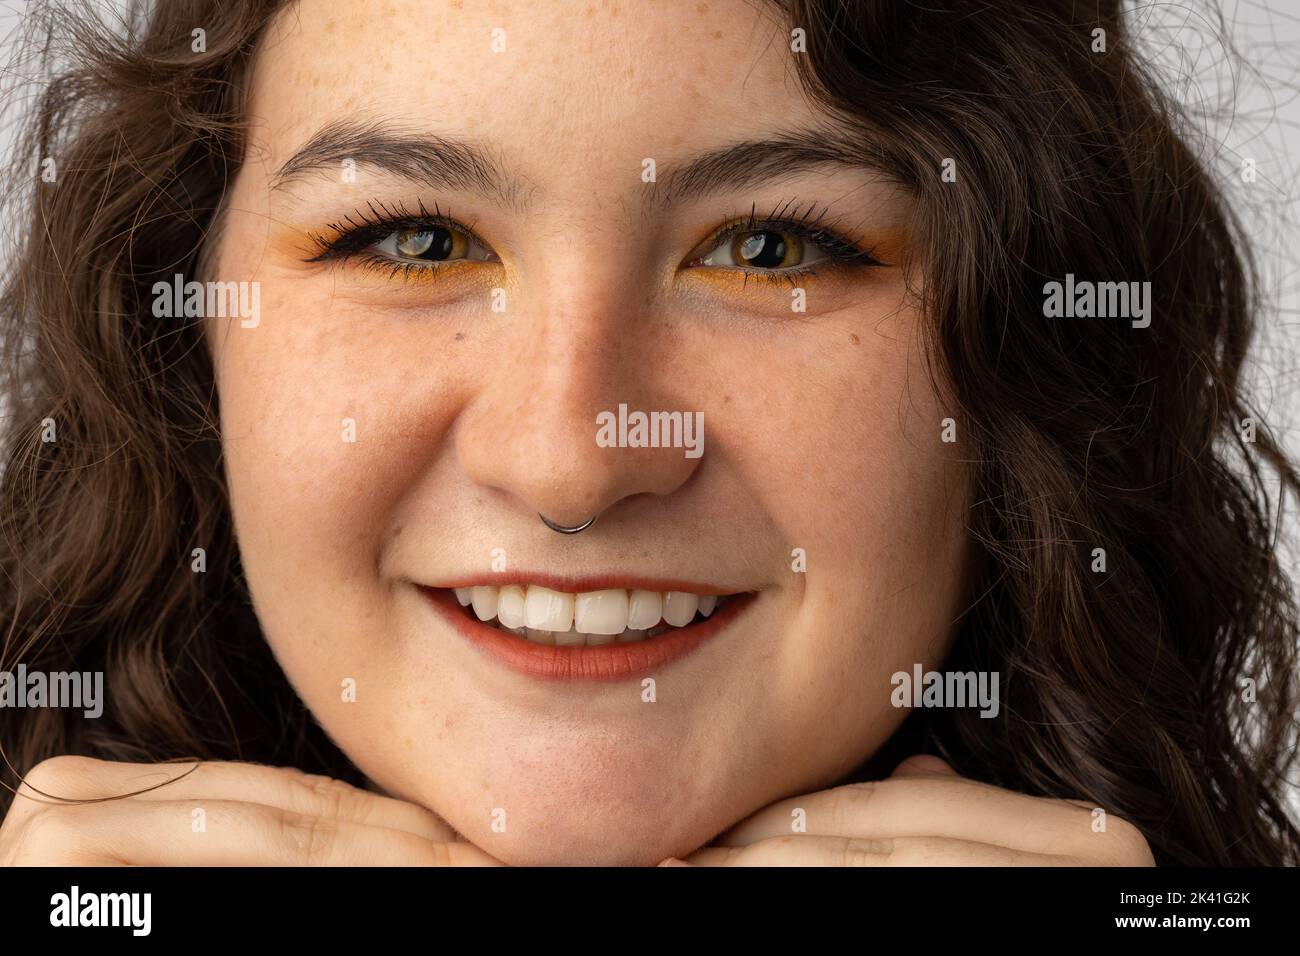 Young lady smiling at camera, with pierced nose. Stock Photo